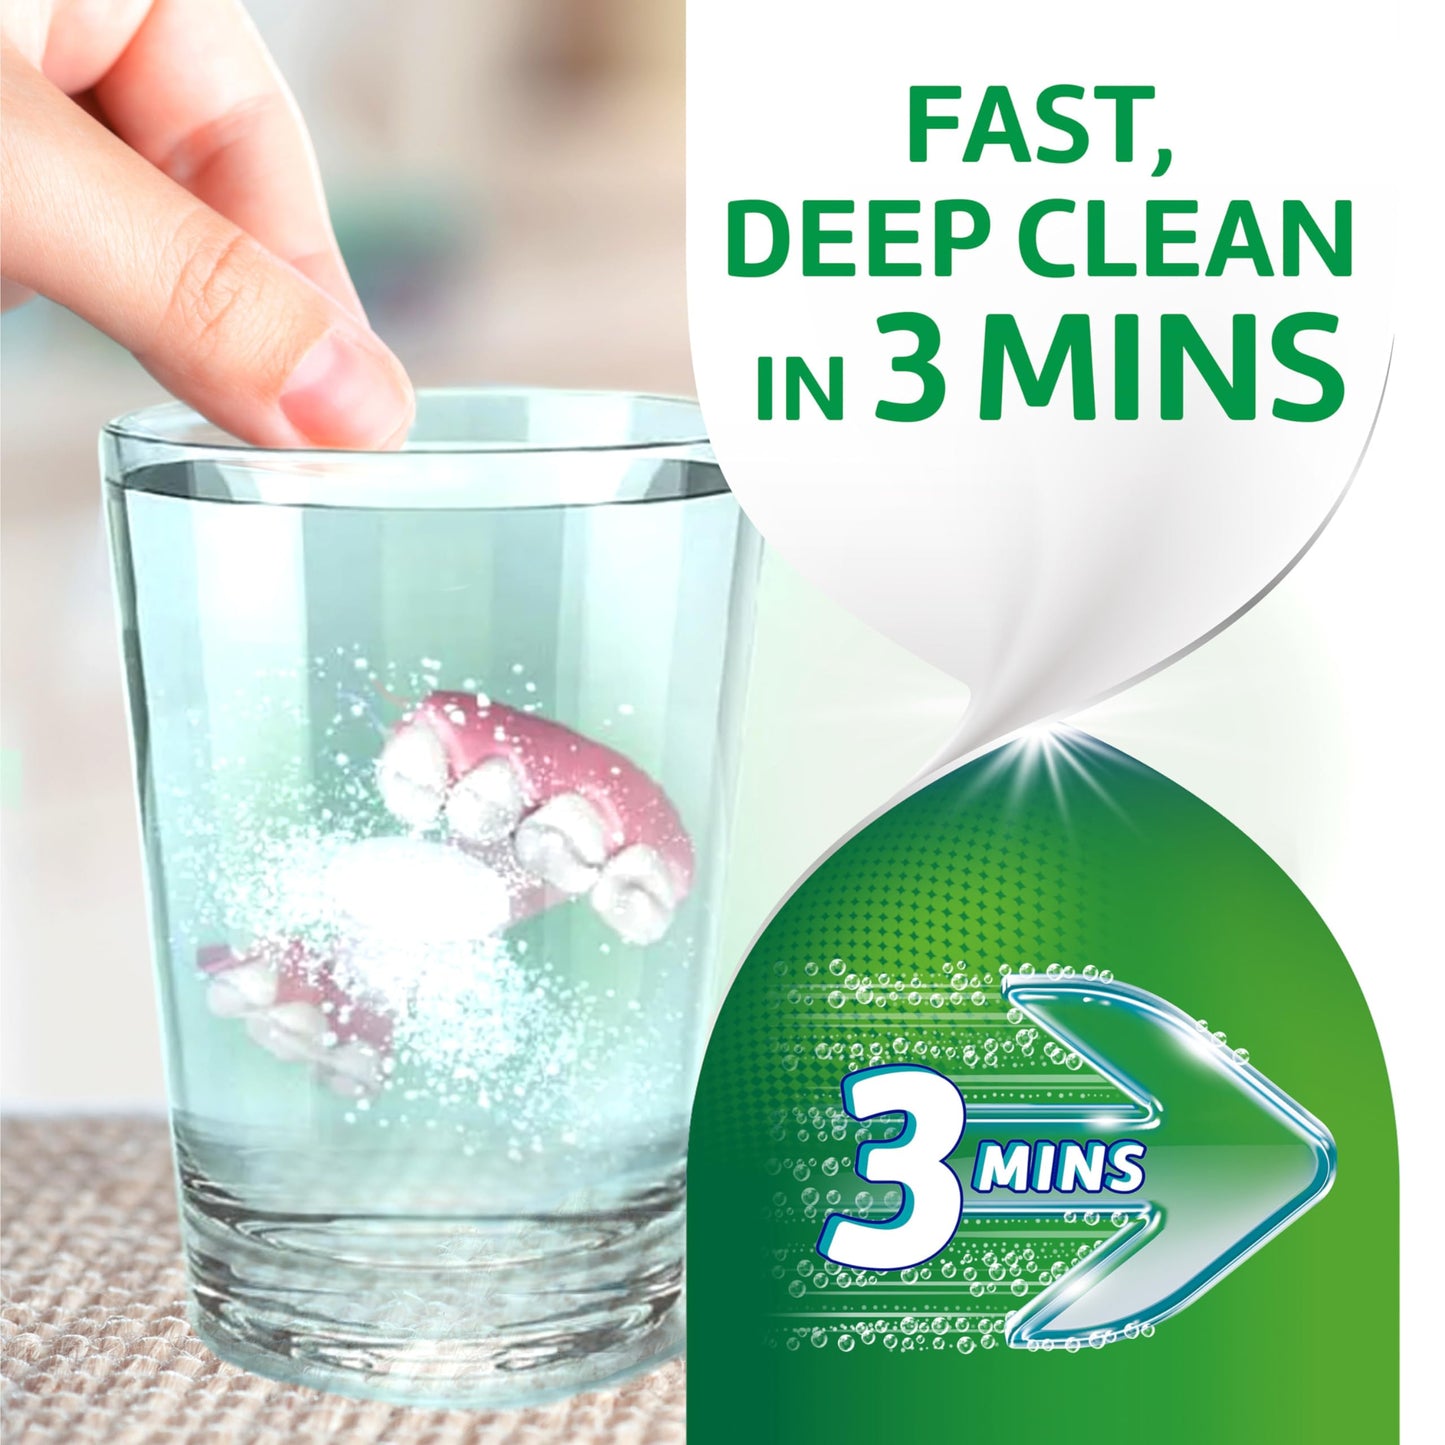 Polident 3-Minute Antibacterial Denture Cleanser - Mint, 3 Minute Whitening, 120 Count